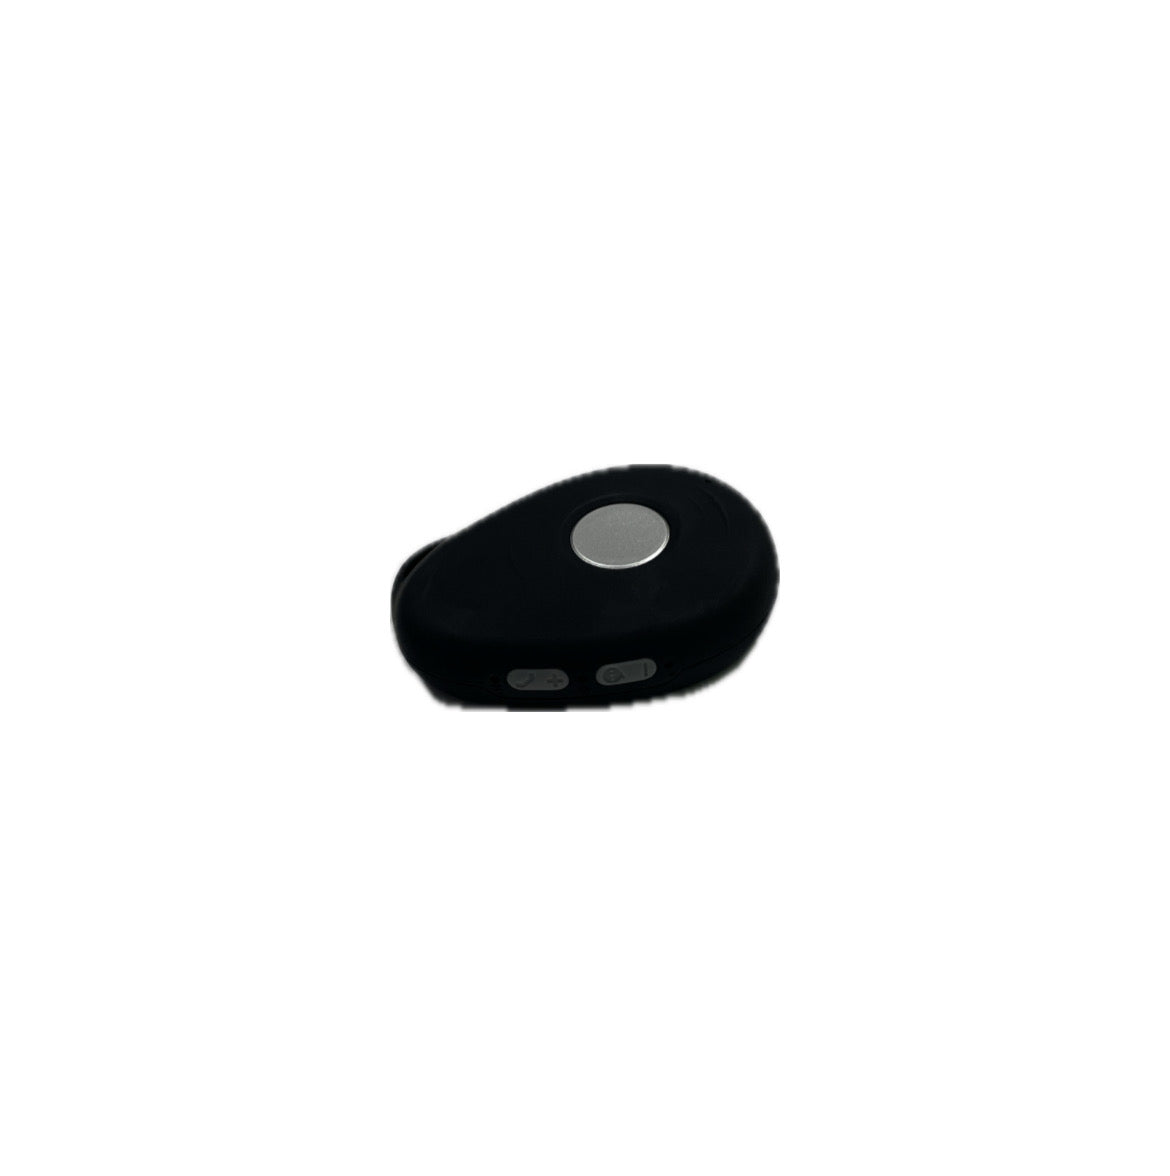 Keychain GPS Tracker-Updates Exact Location Live-No Monthly